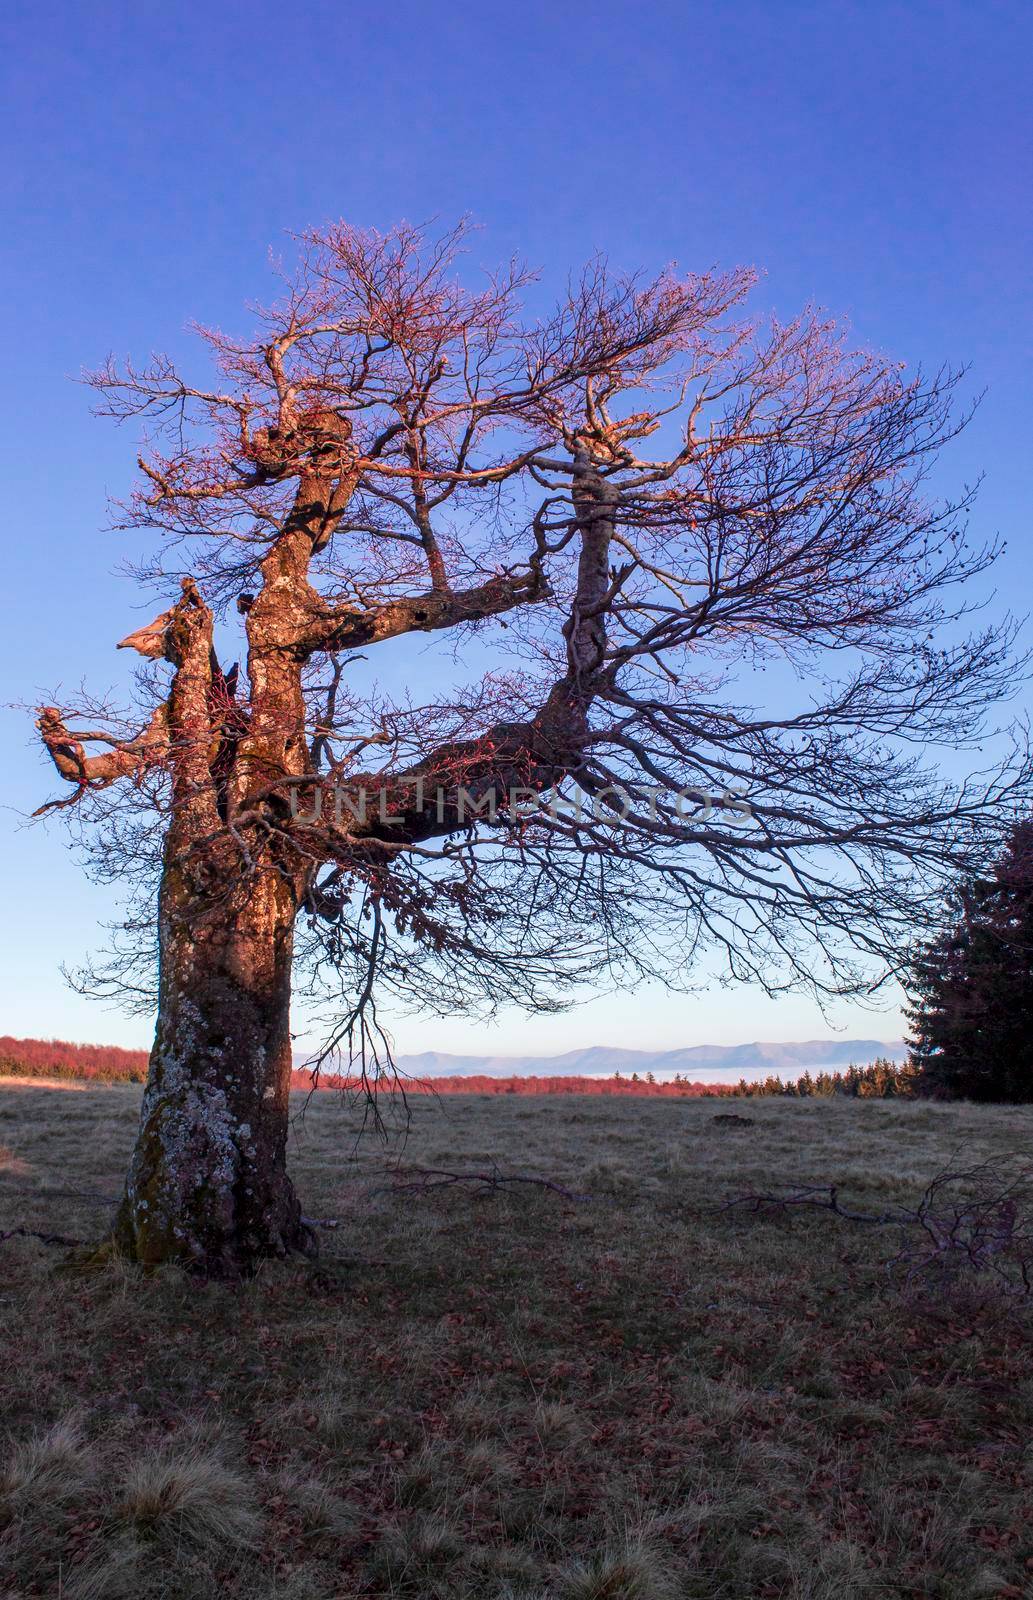 An old tree, with a blue sky, with a view of the mountains in a vertical position by bybyphotography